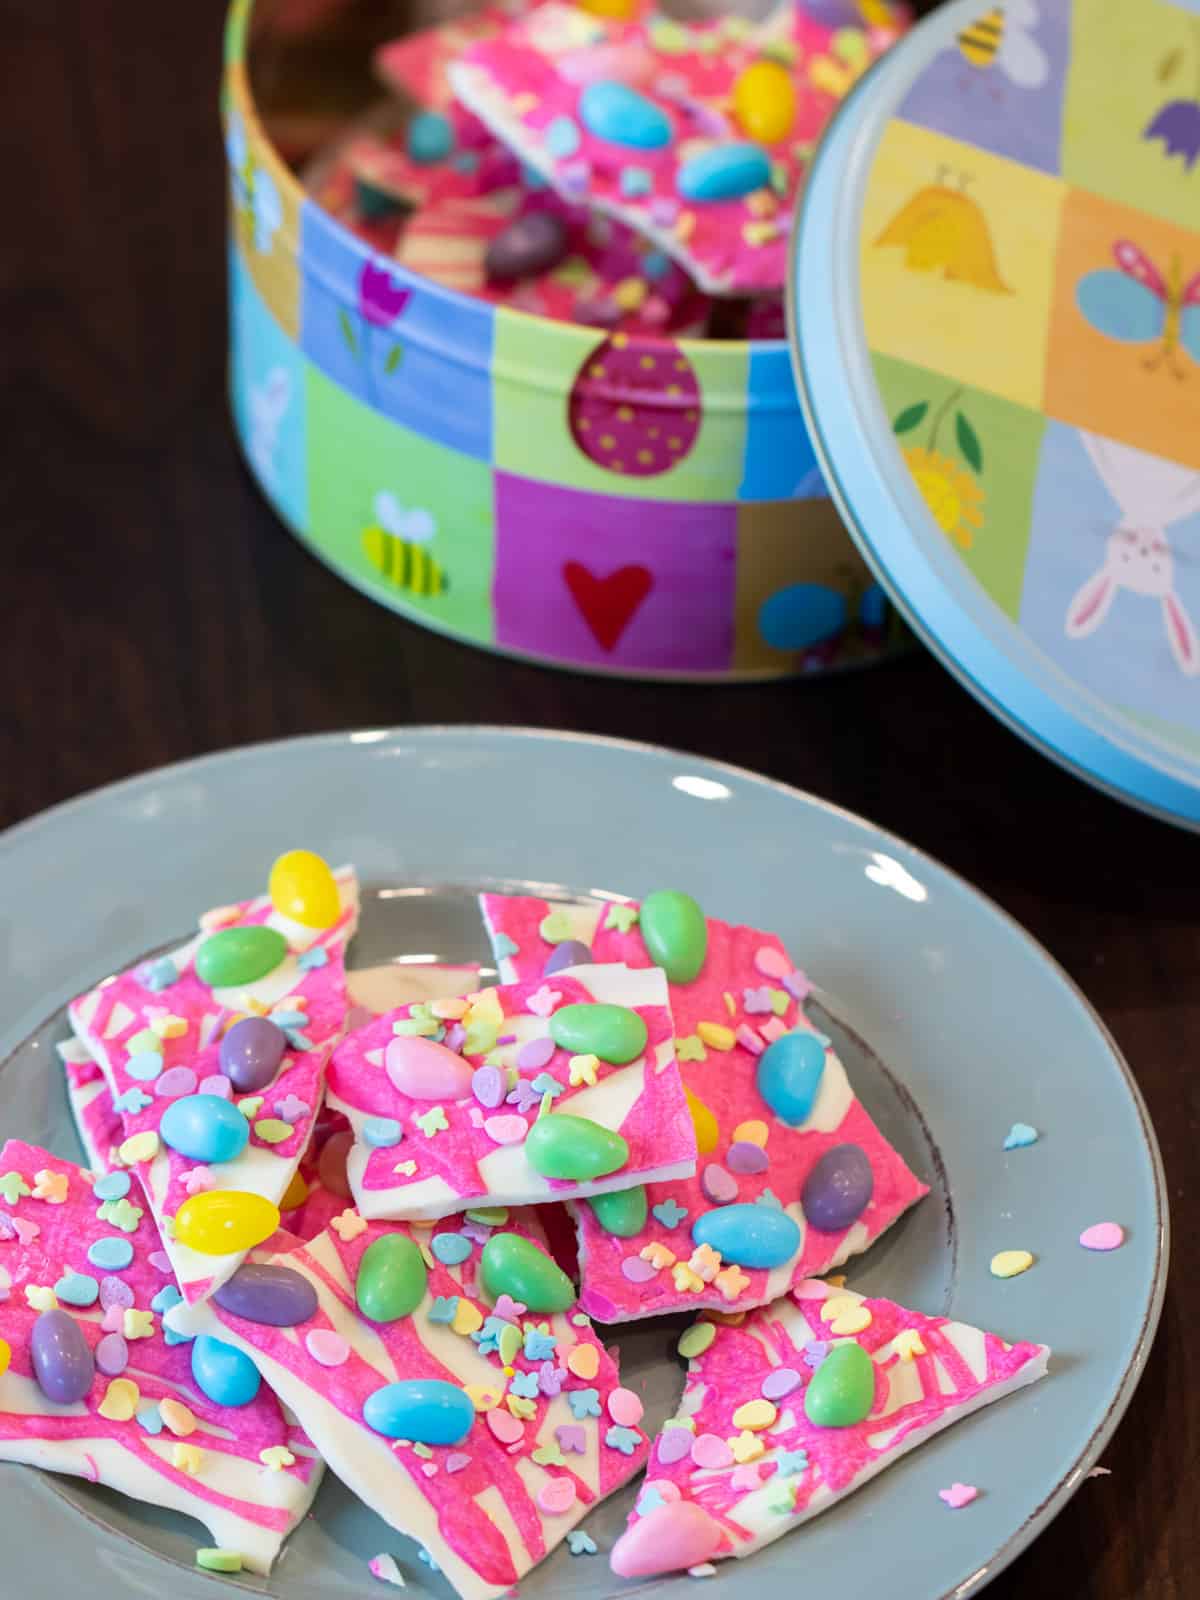 Pink candy melts with sprinkles and jelly beans.